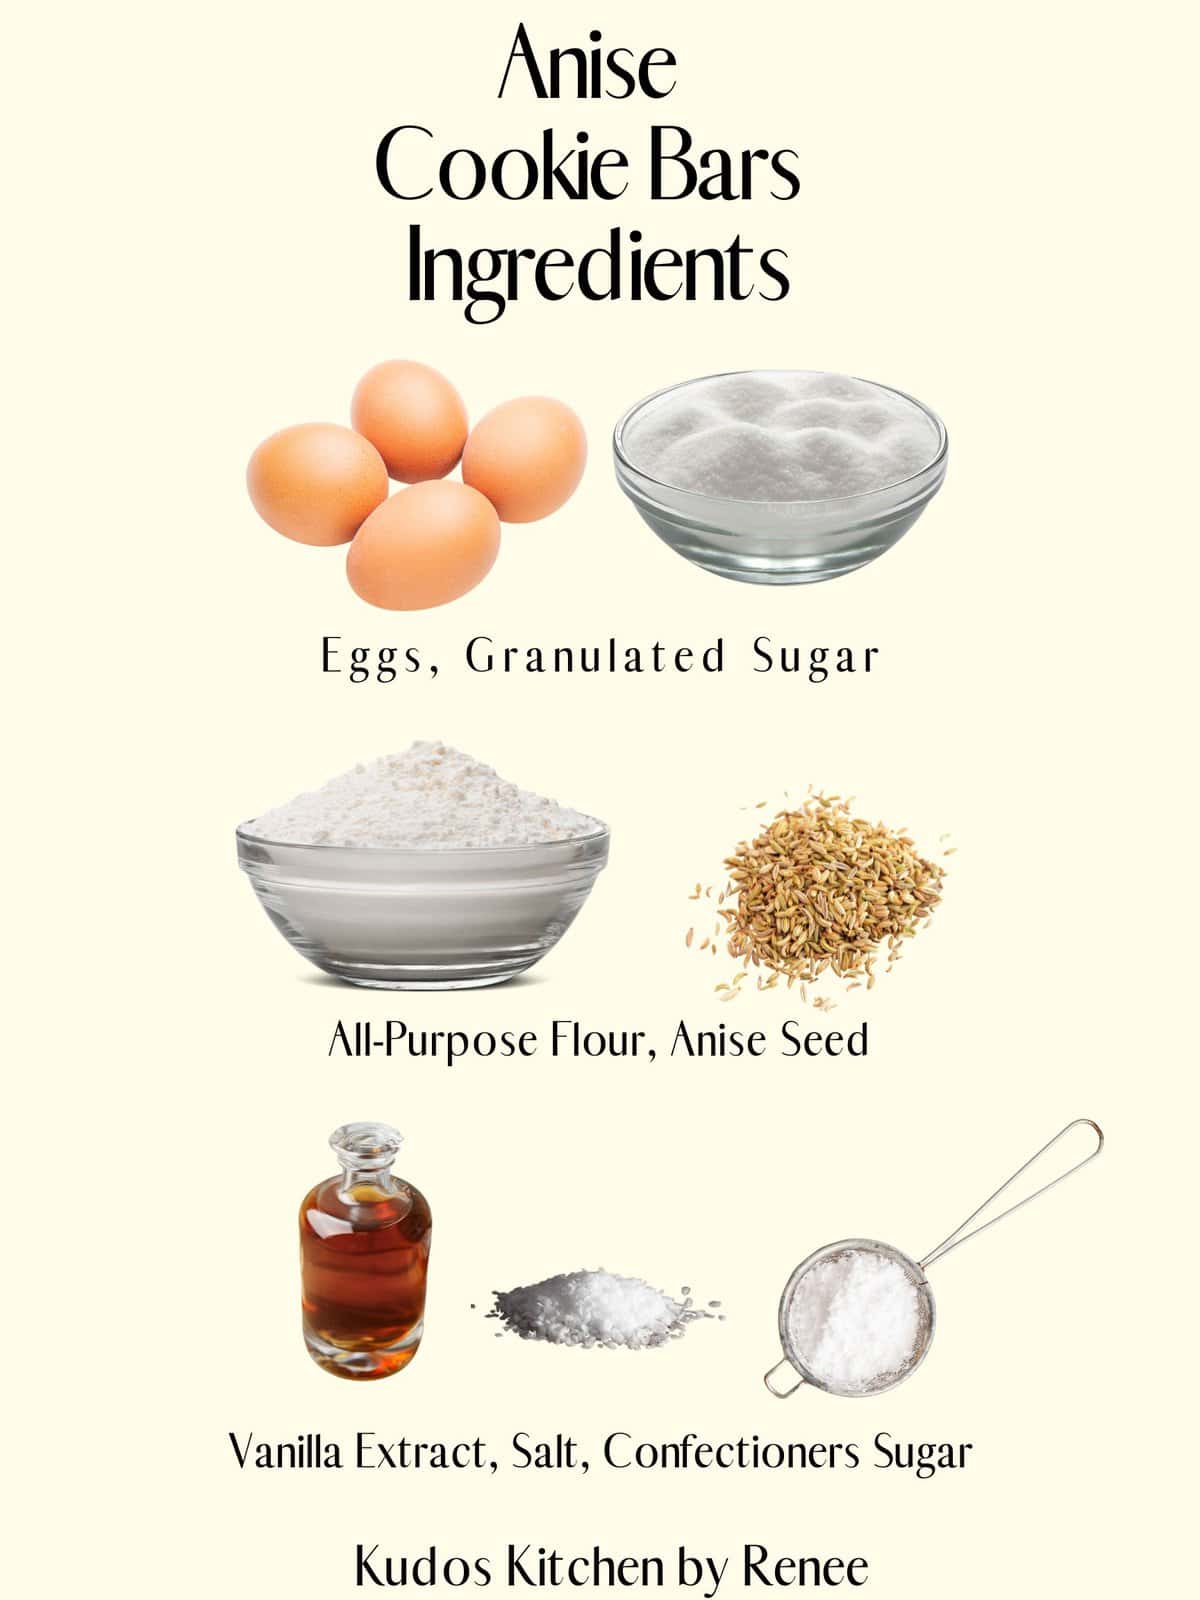 A visual ingredient list for making Anise Cookie Bars.